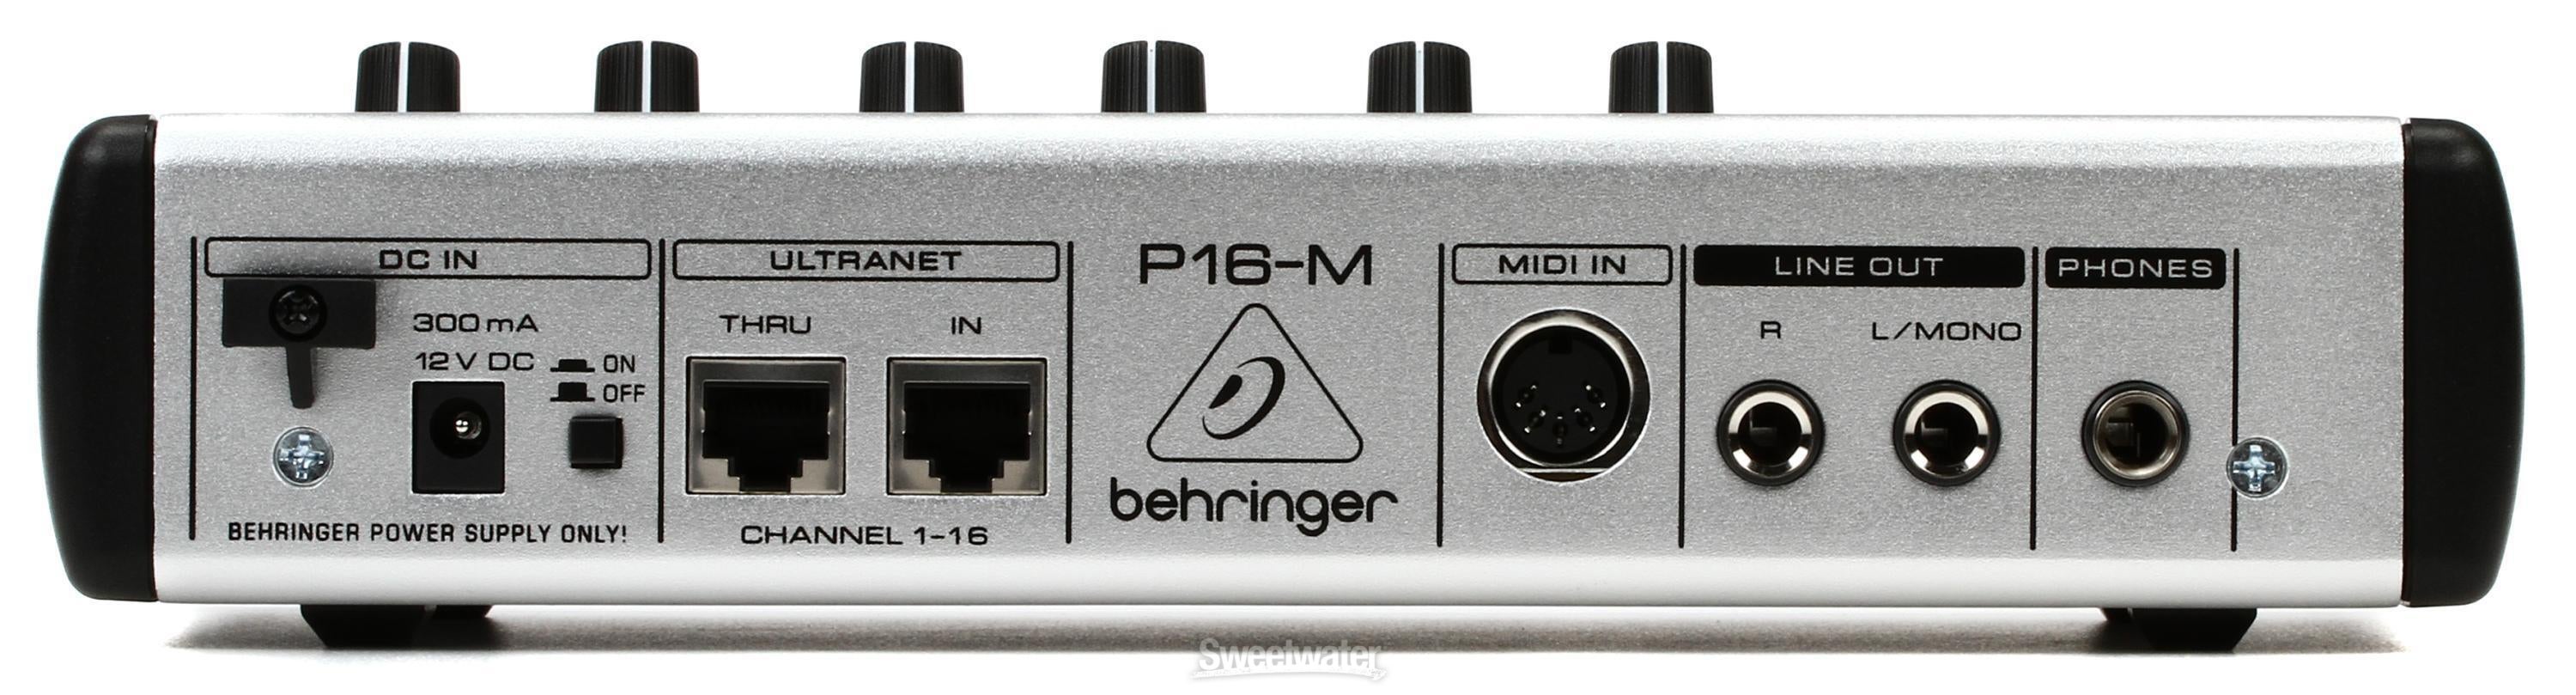 Behringer Powerplay P16-M 16-channel Digital Personal Mixer | Sweetwater